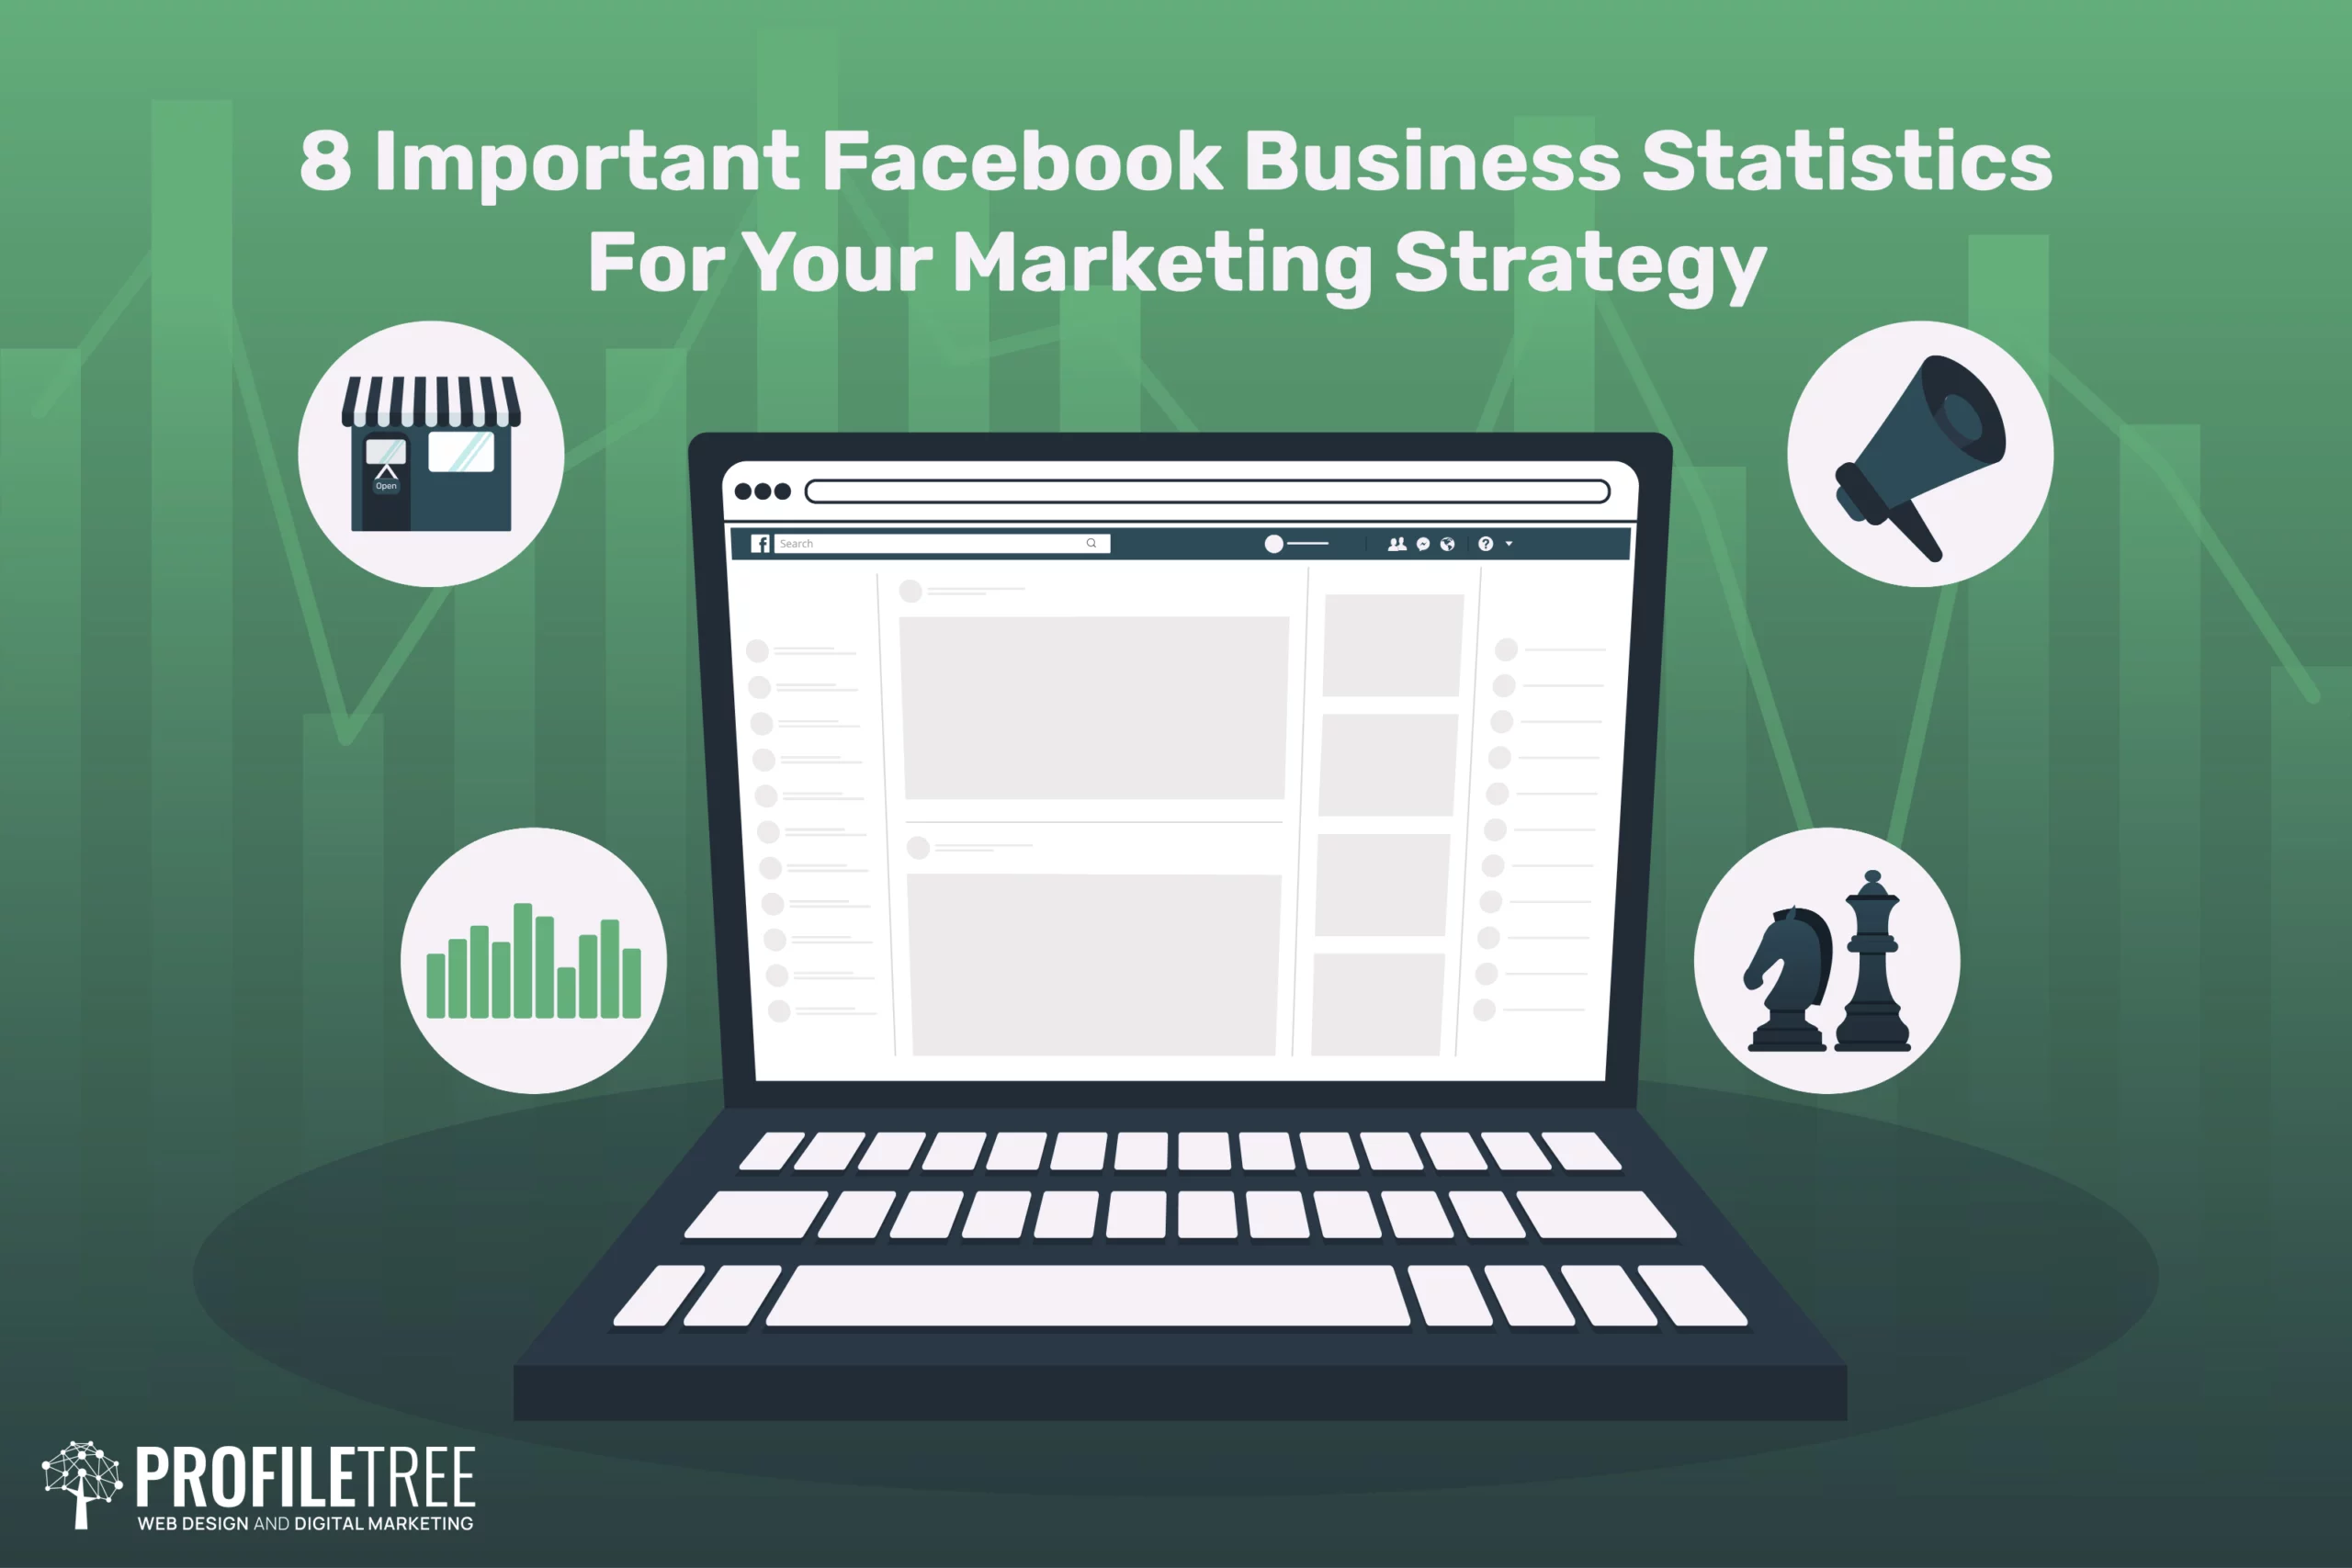 Facebook Business Statistics For Your Marketing Strategy